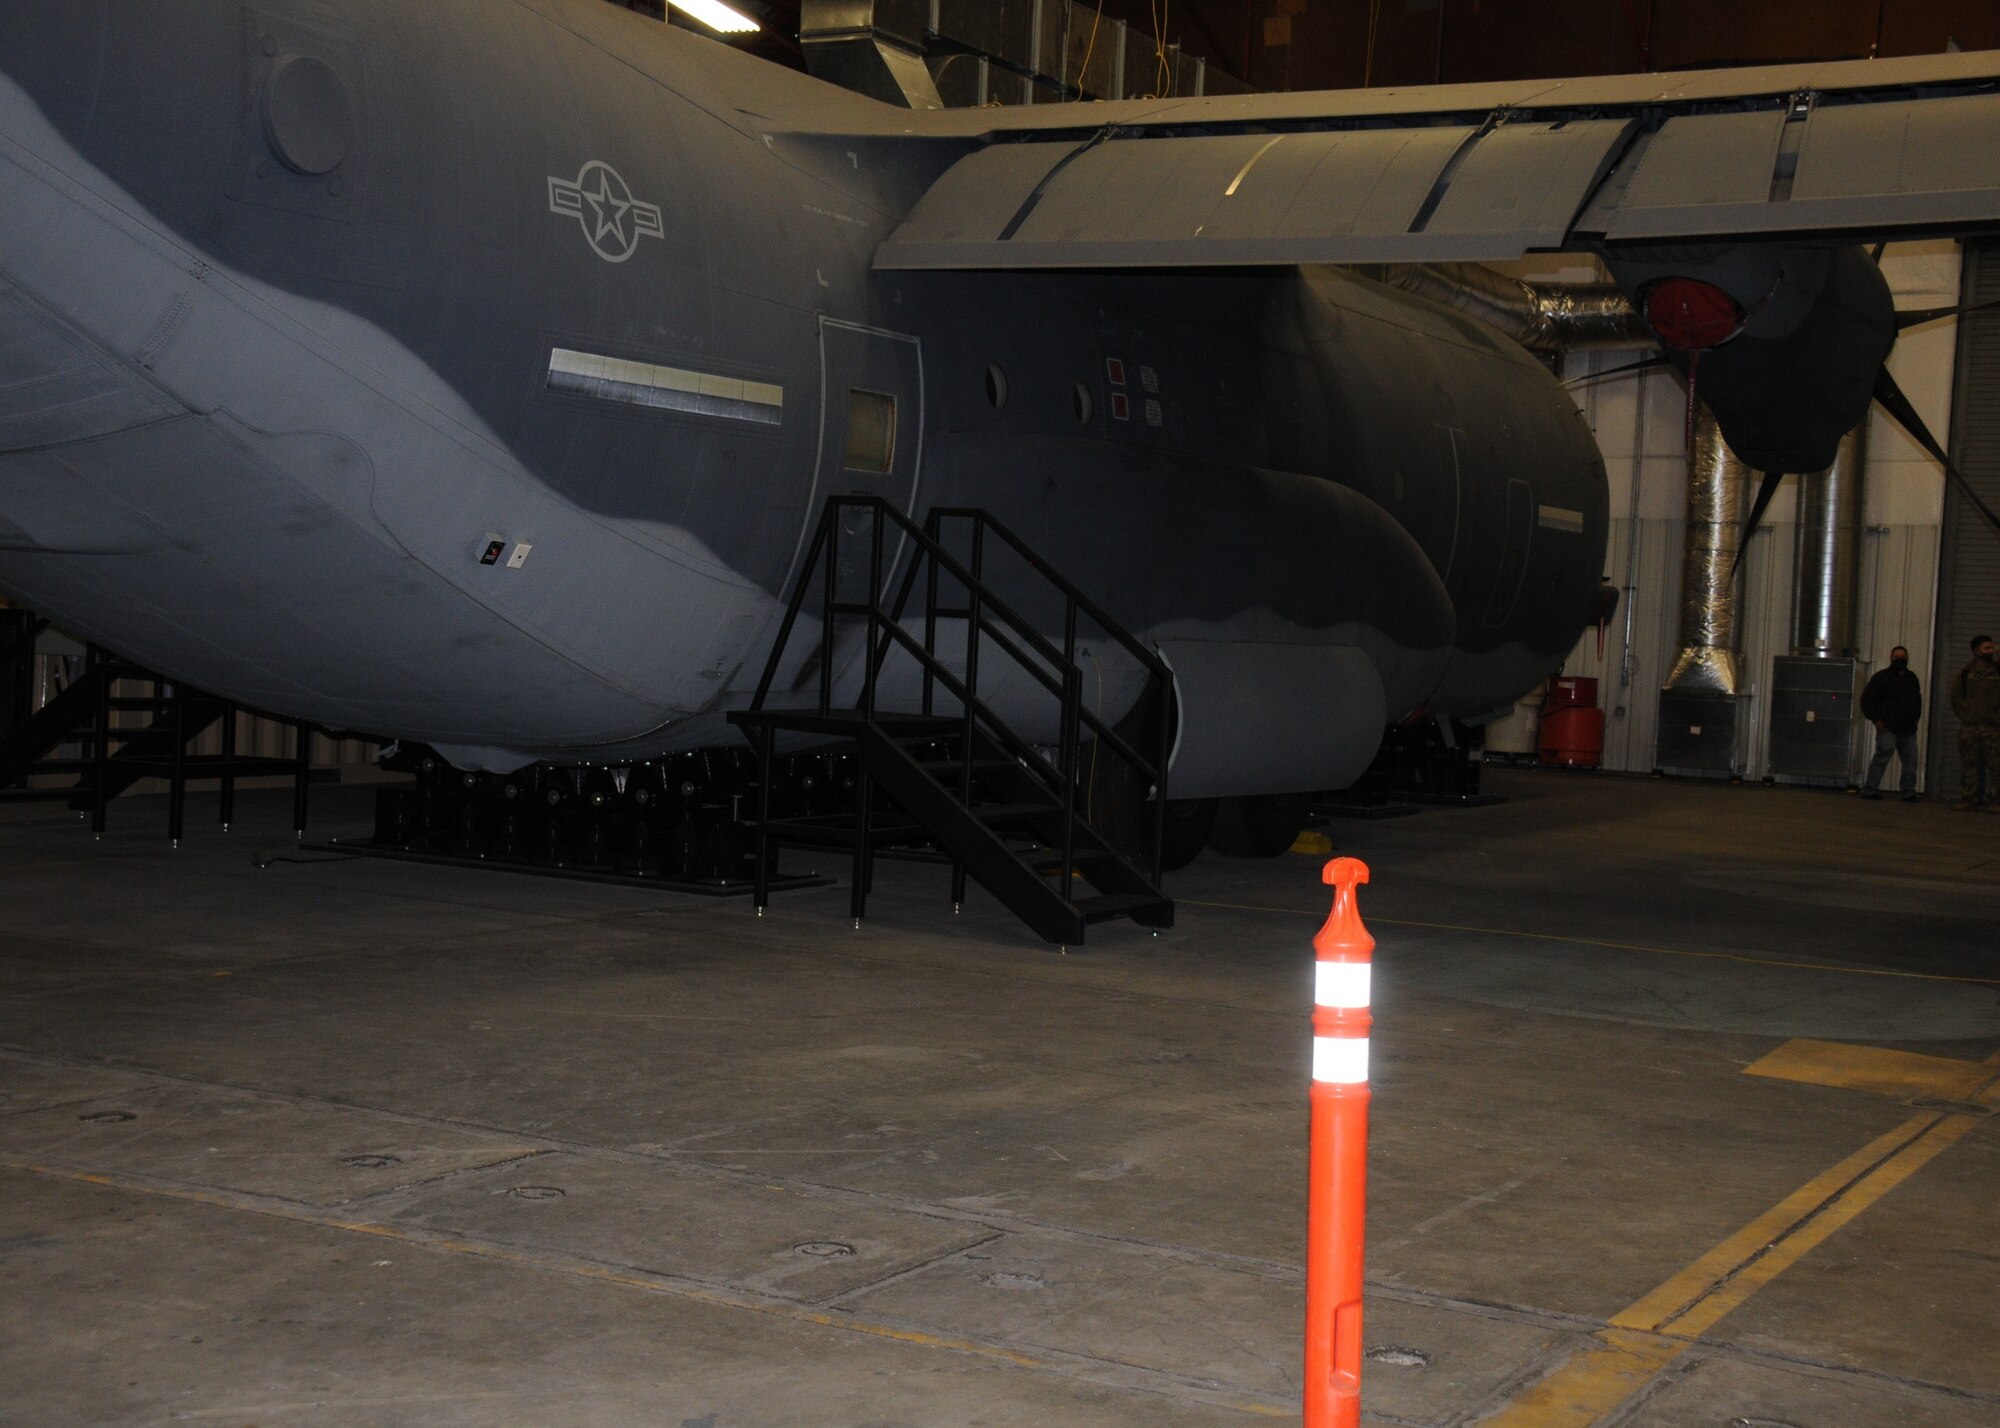 A ground training device is installed in an aircraft hangar.